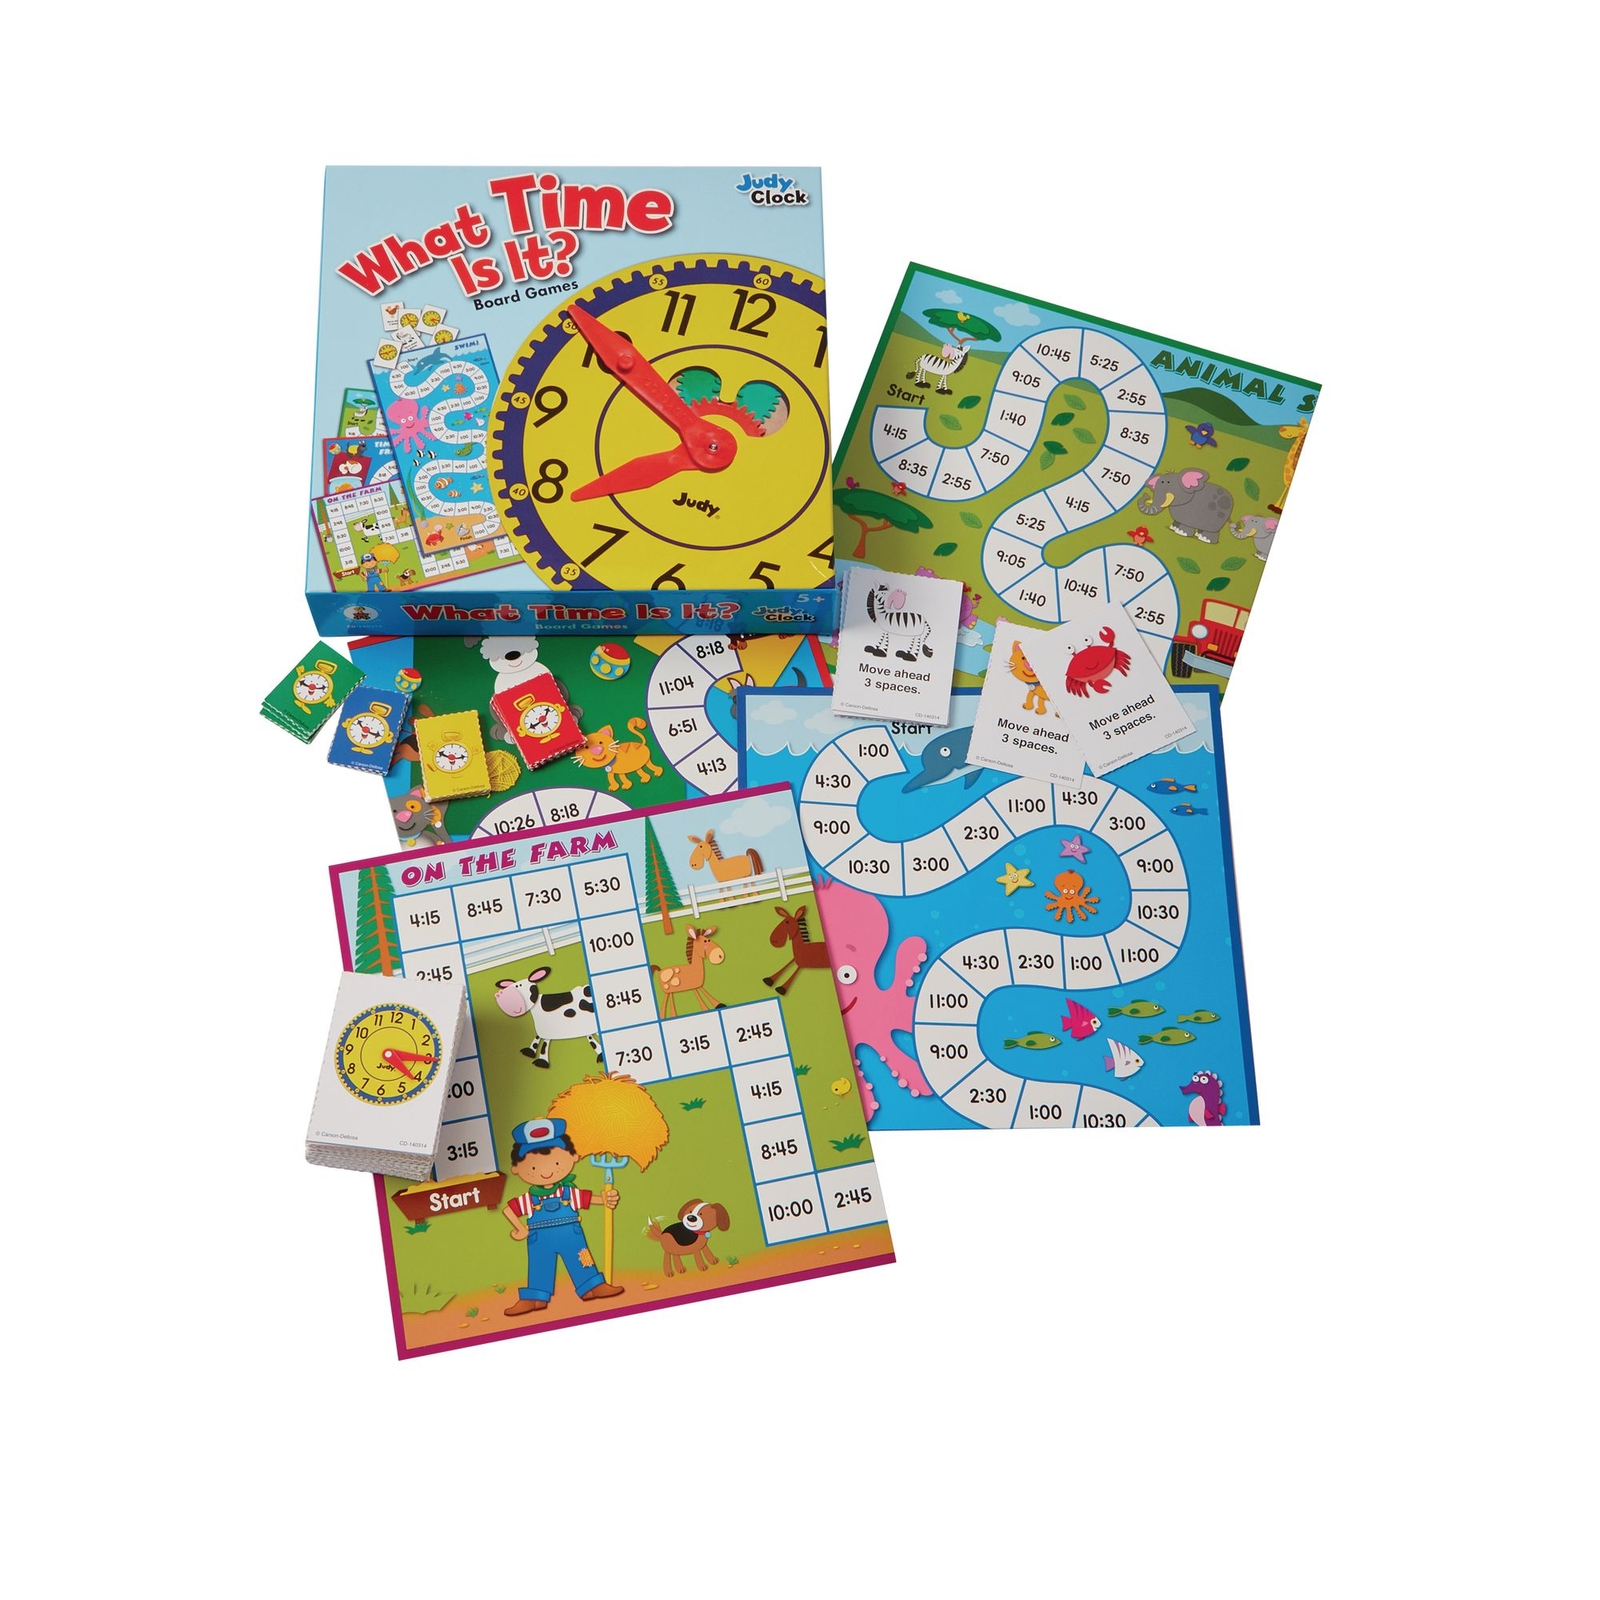 Bumper Time Game Pack of 3